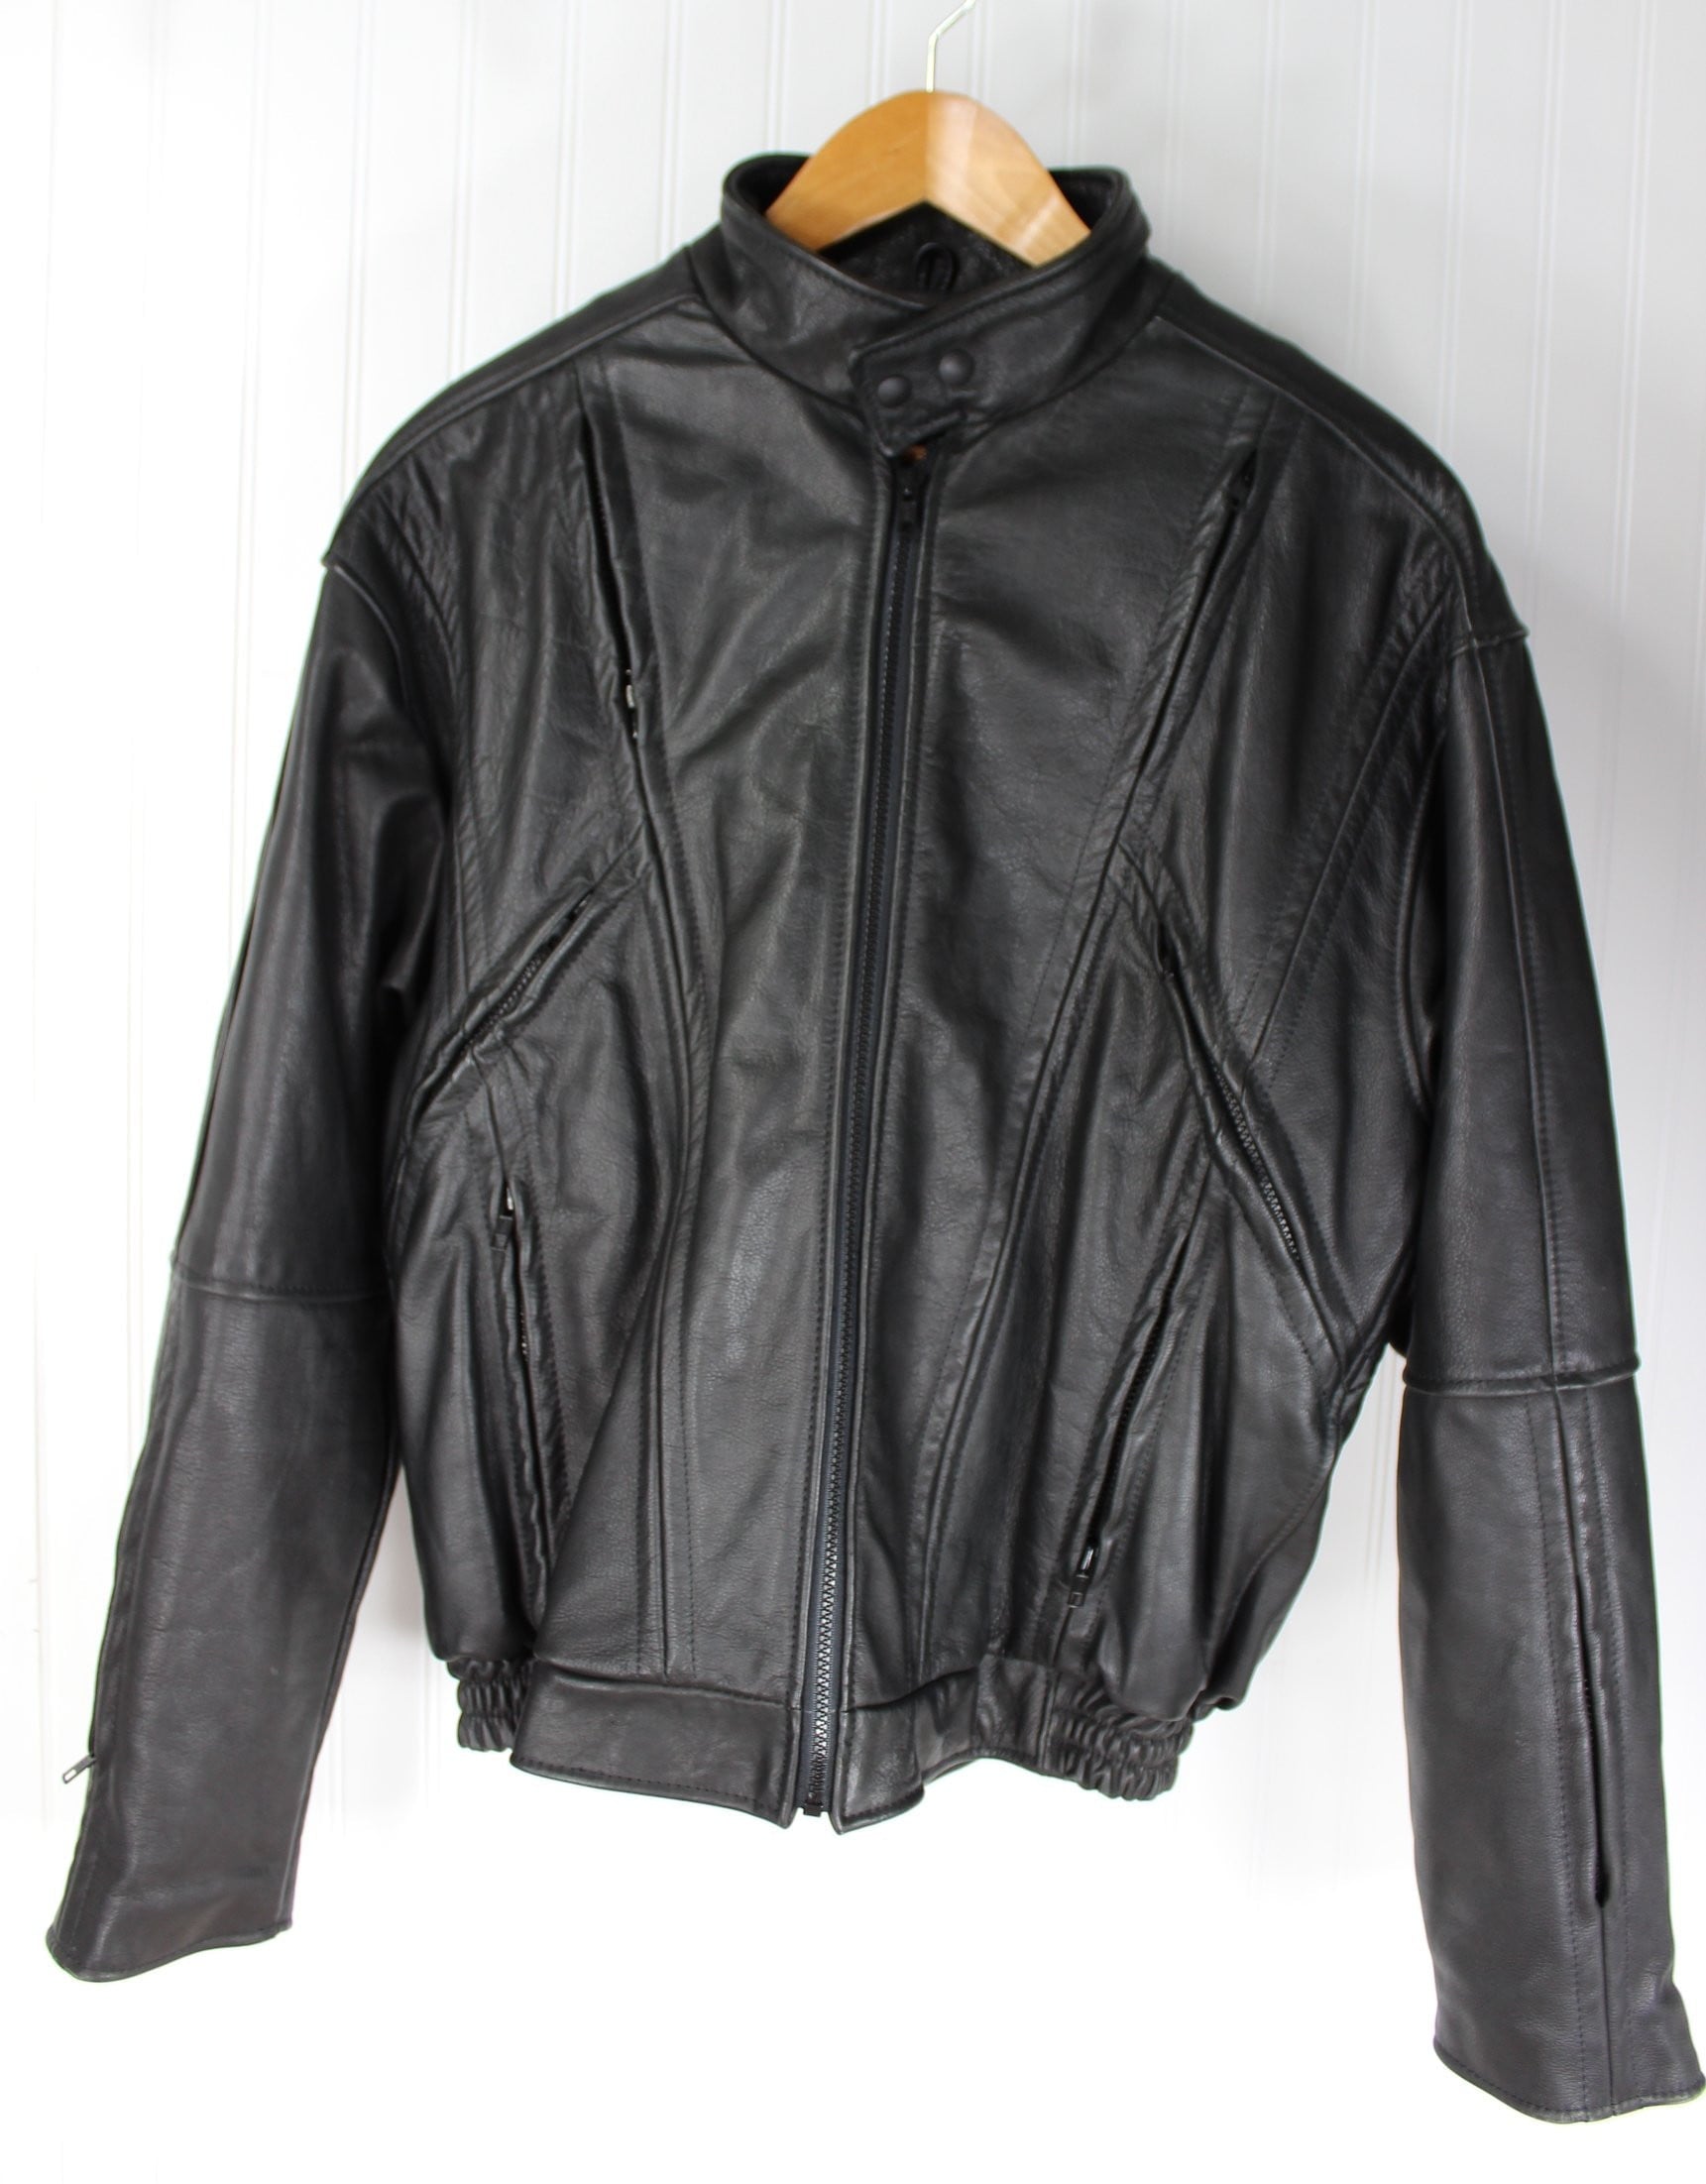 Protech USA Performance Leather Black Motorcycle Jacket M Vintage - Thinsulate Lining 